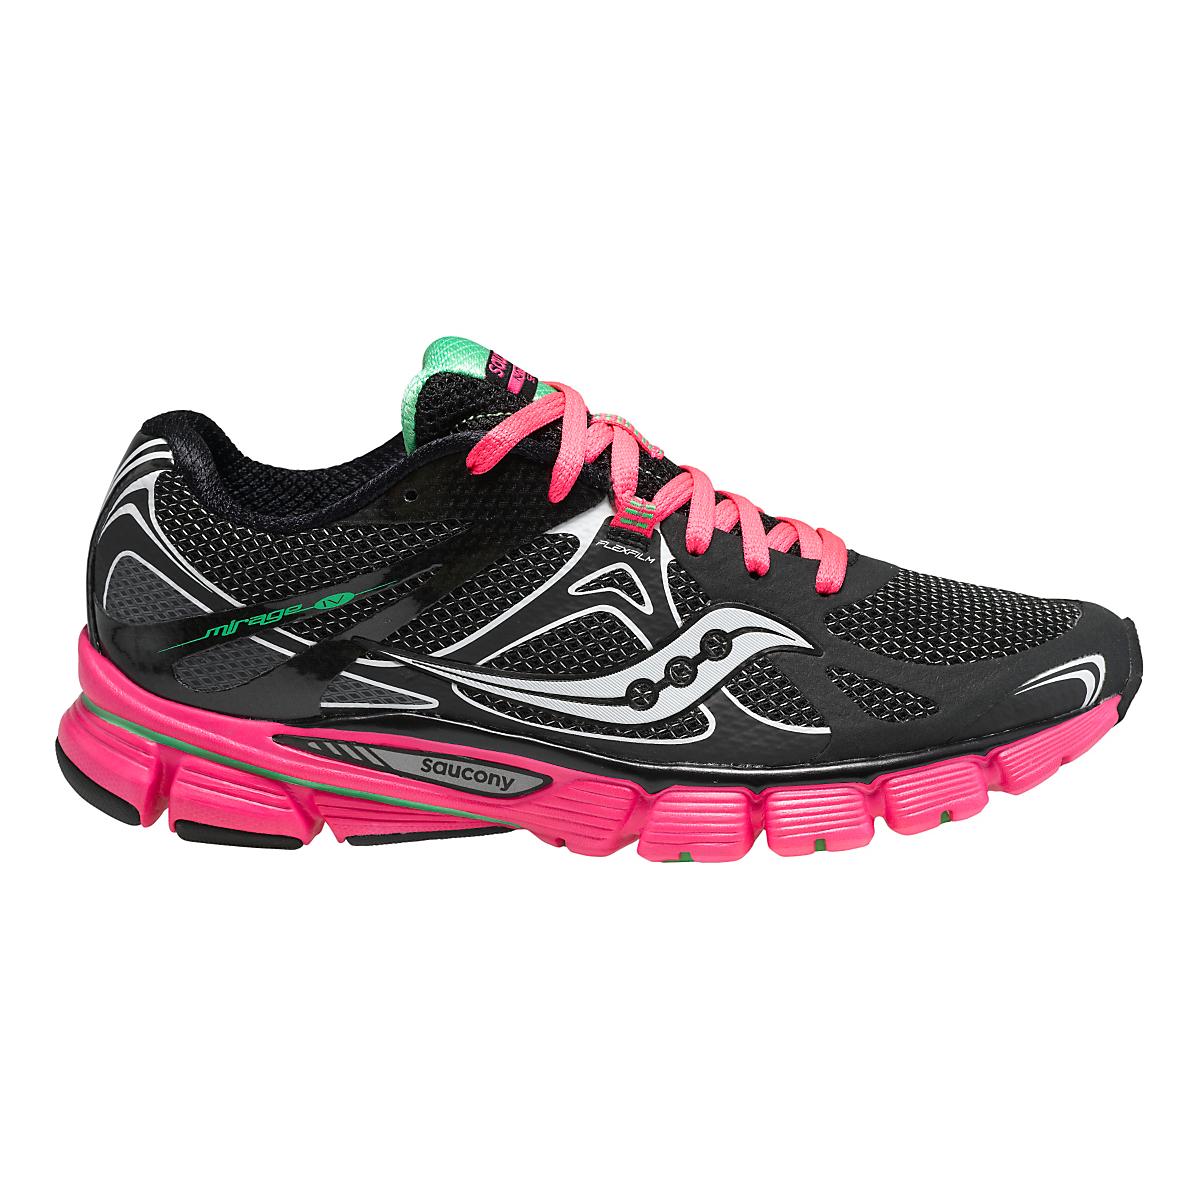 Womens Saucony Mirage 4 Running Shoe at Road Runner Sports